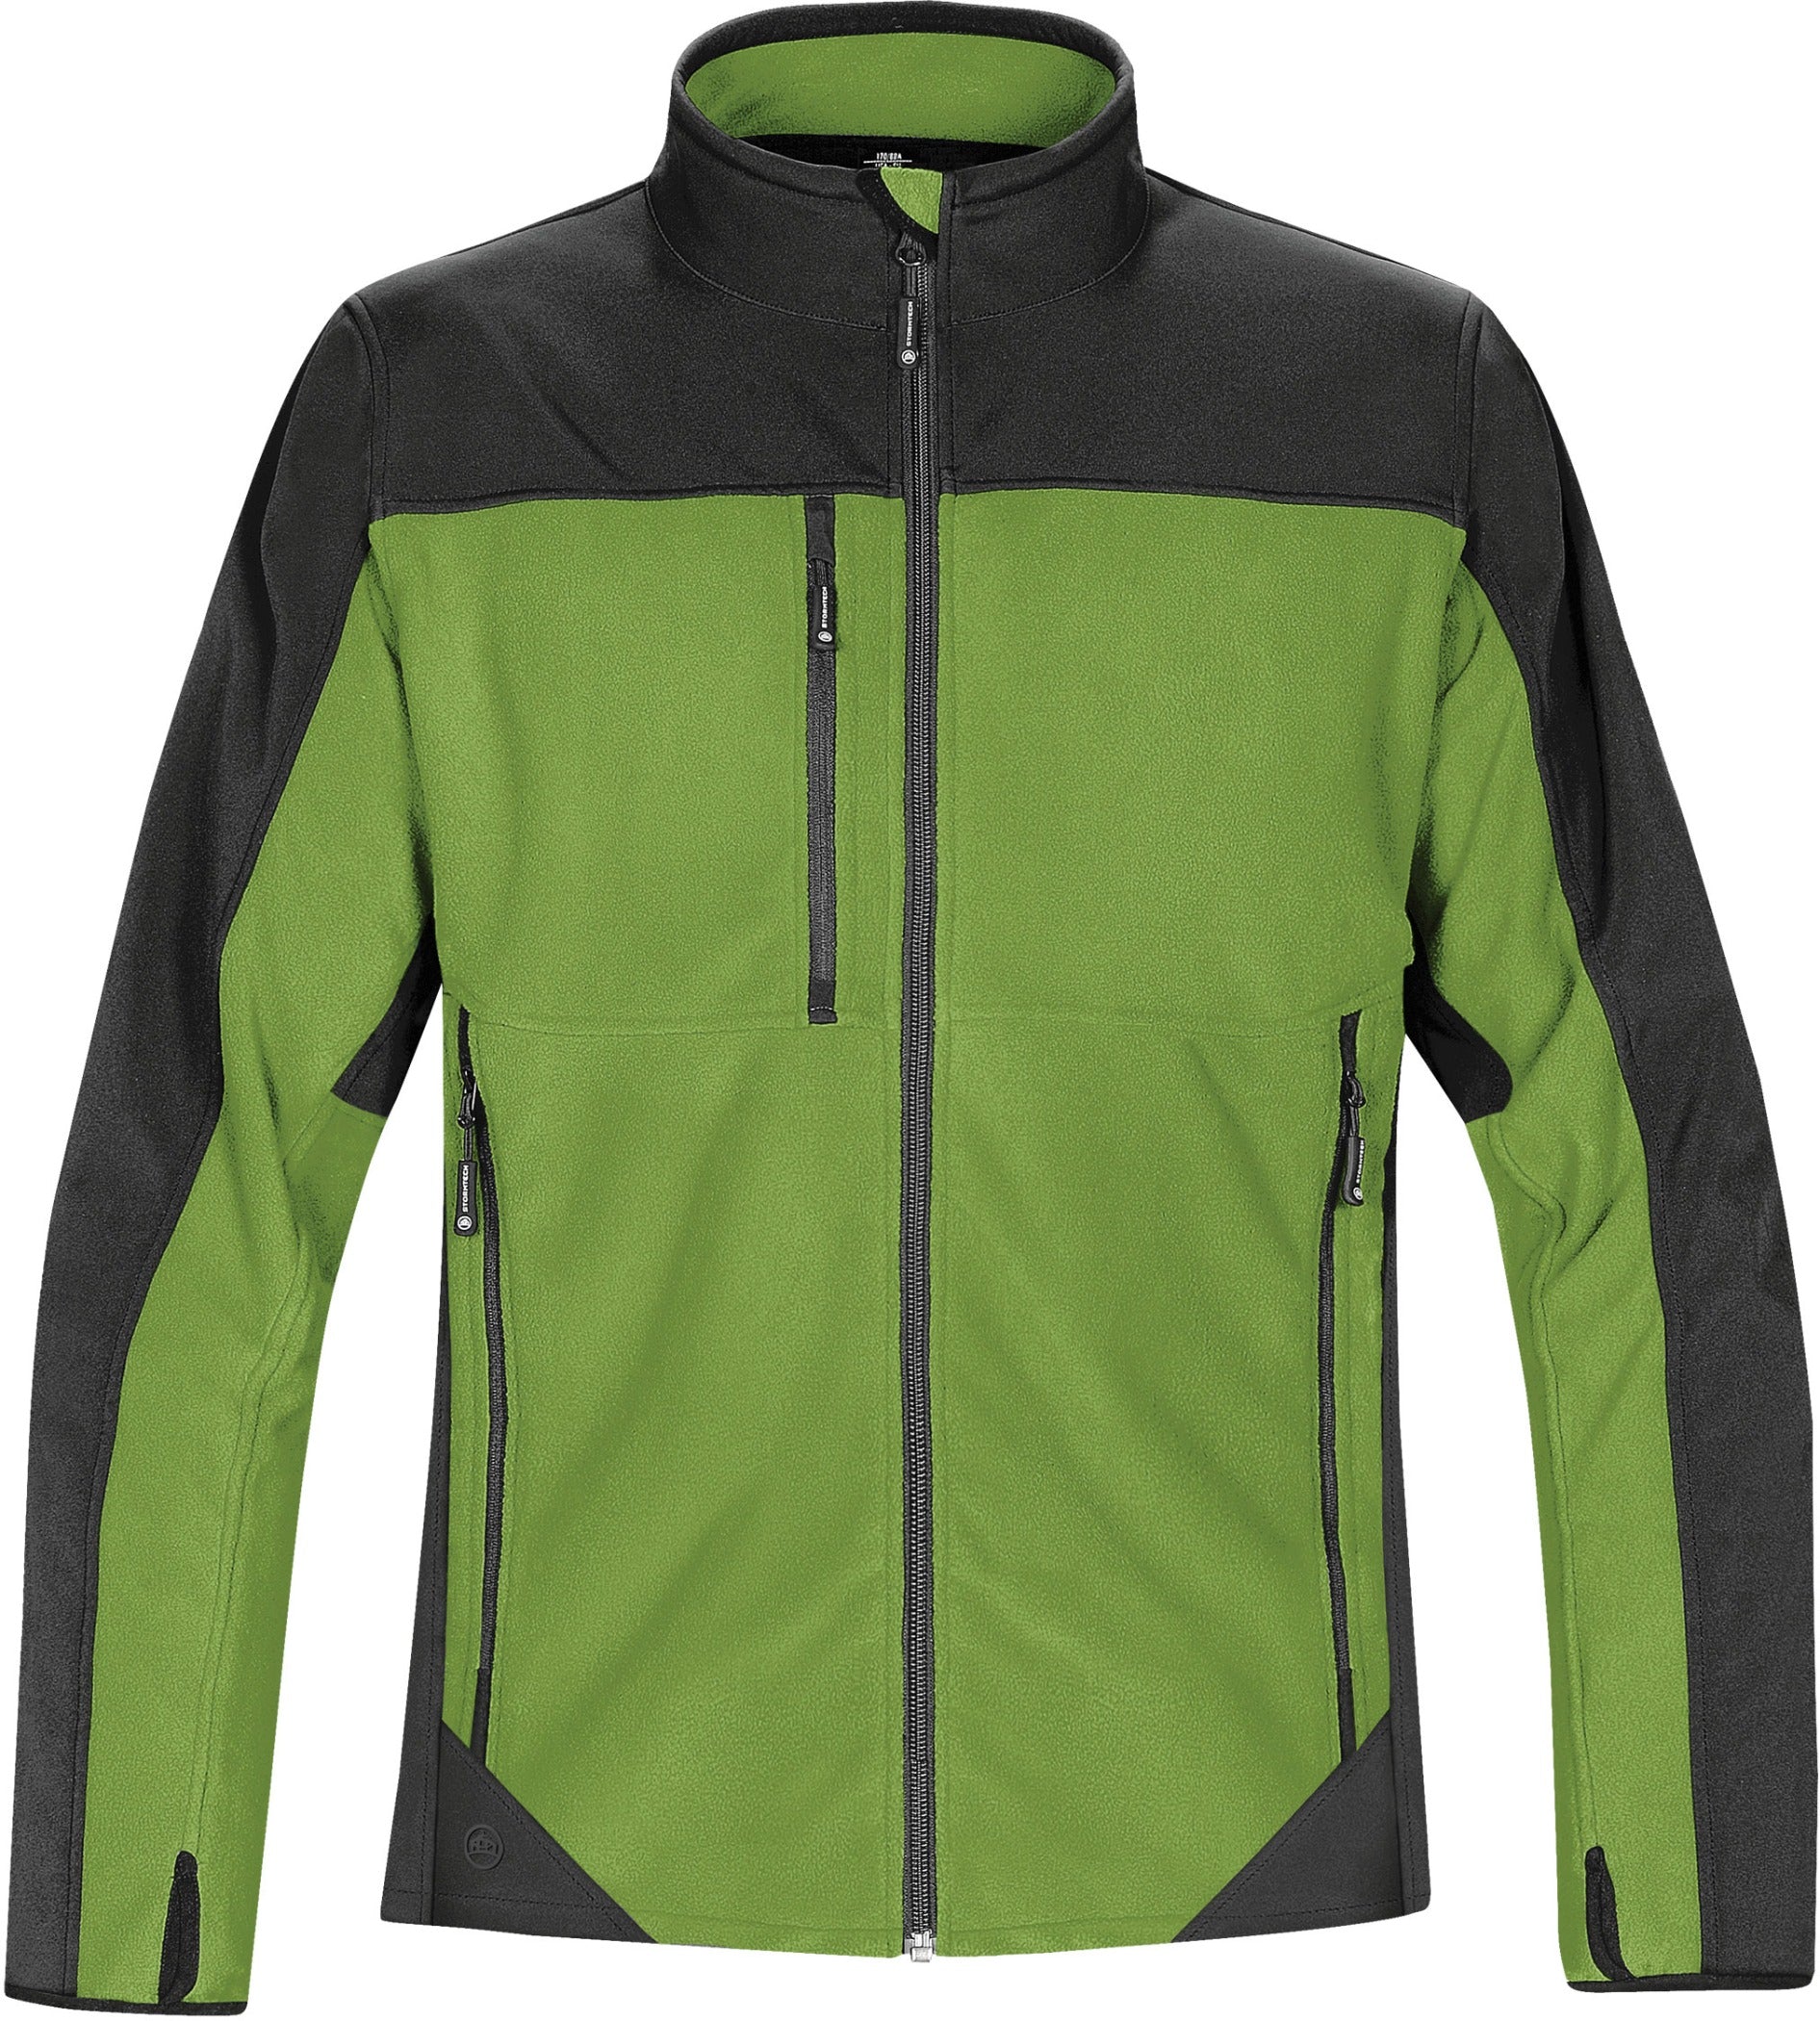 Green and Black Softshell